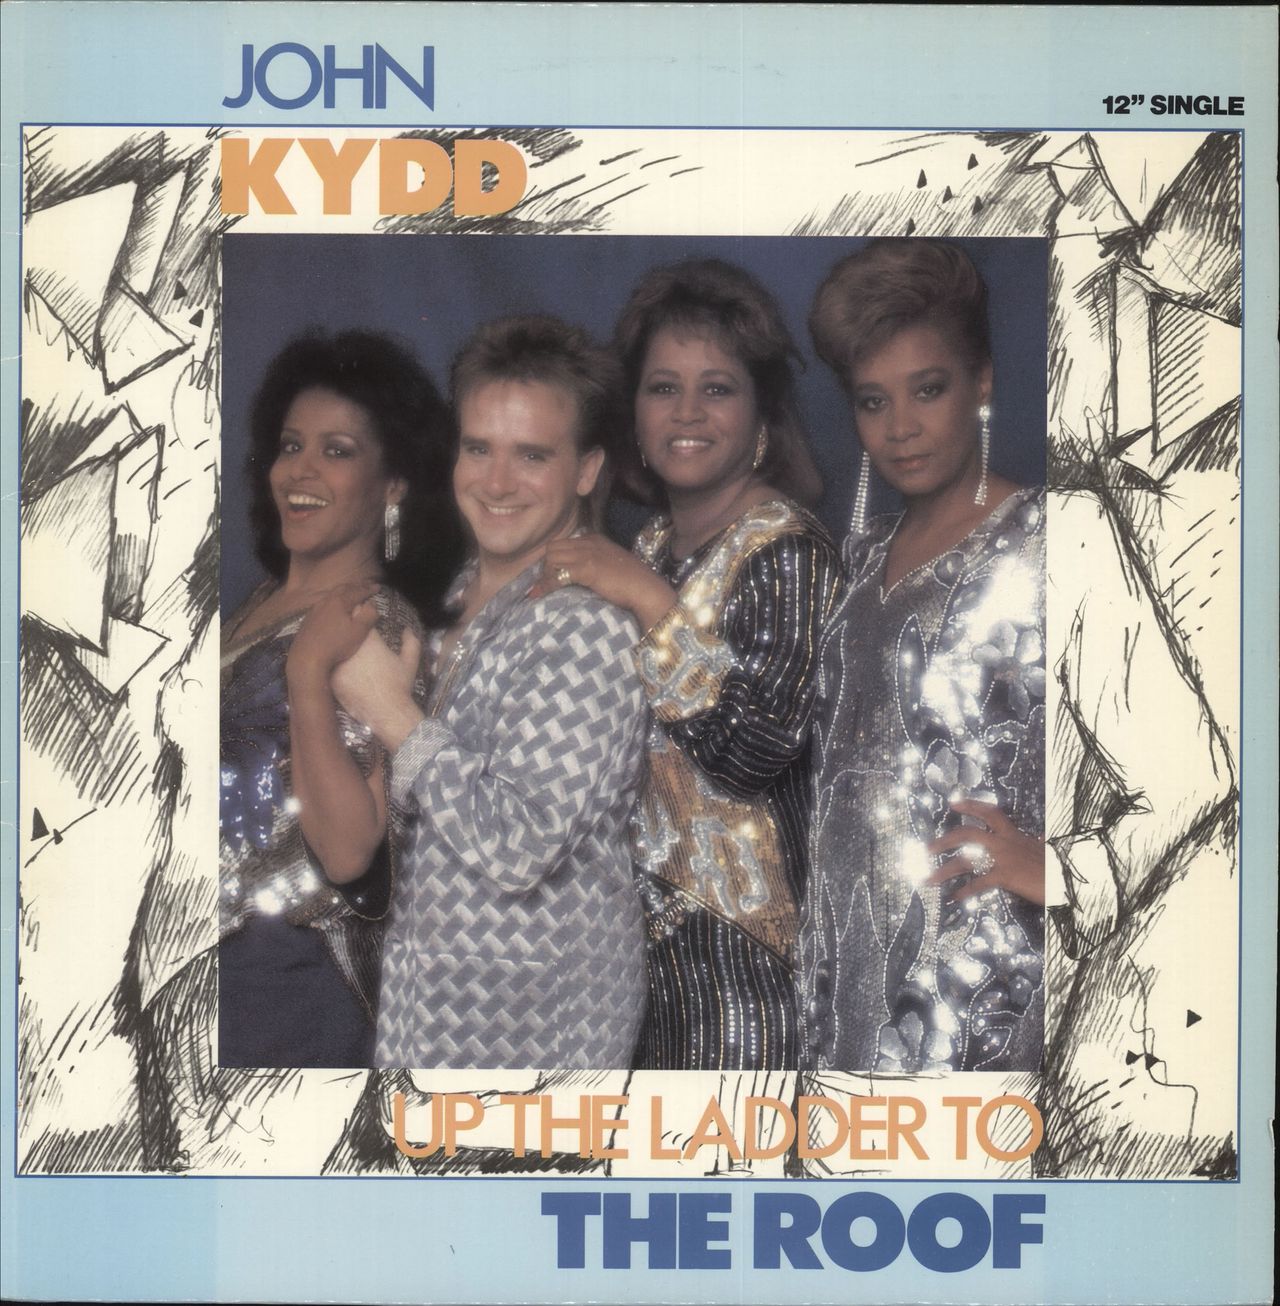 John Kydd Up The Ladder To The Roof US 12" vinyl single (12 inch record / Maxi-single) NWO-9208